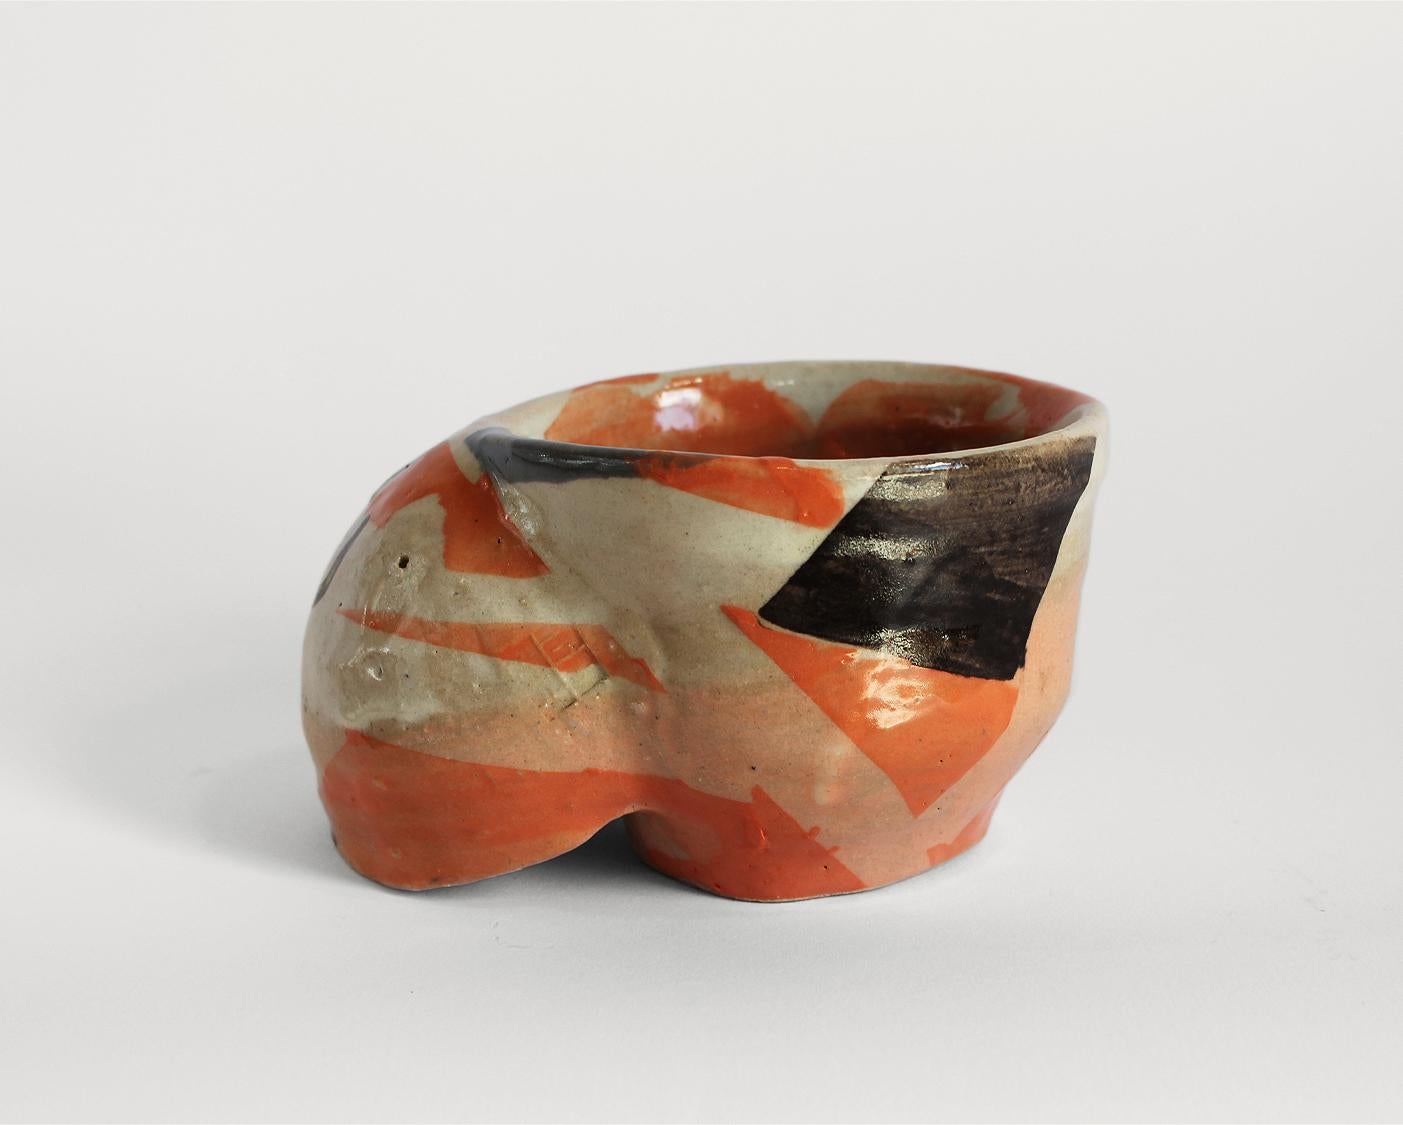 Terre sonore - Shun Kadohashi

Colorful Free form Japanese ceramic cup 

15 x 10,5 cm H:8,5 cm
Sandstone
Made in Japan
Unique piece
2023

This work comes with a certificate of authenticity.

Shun Kadohashi is a Japanese ceramic artist who lives and